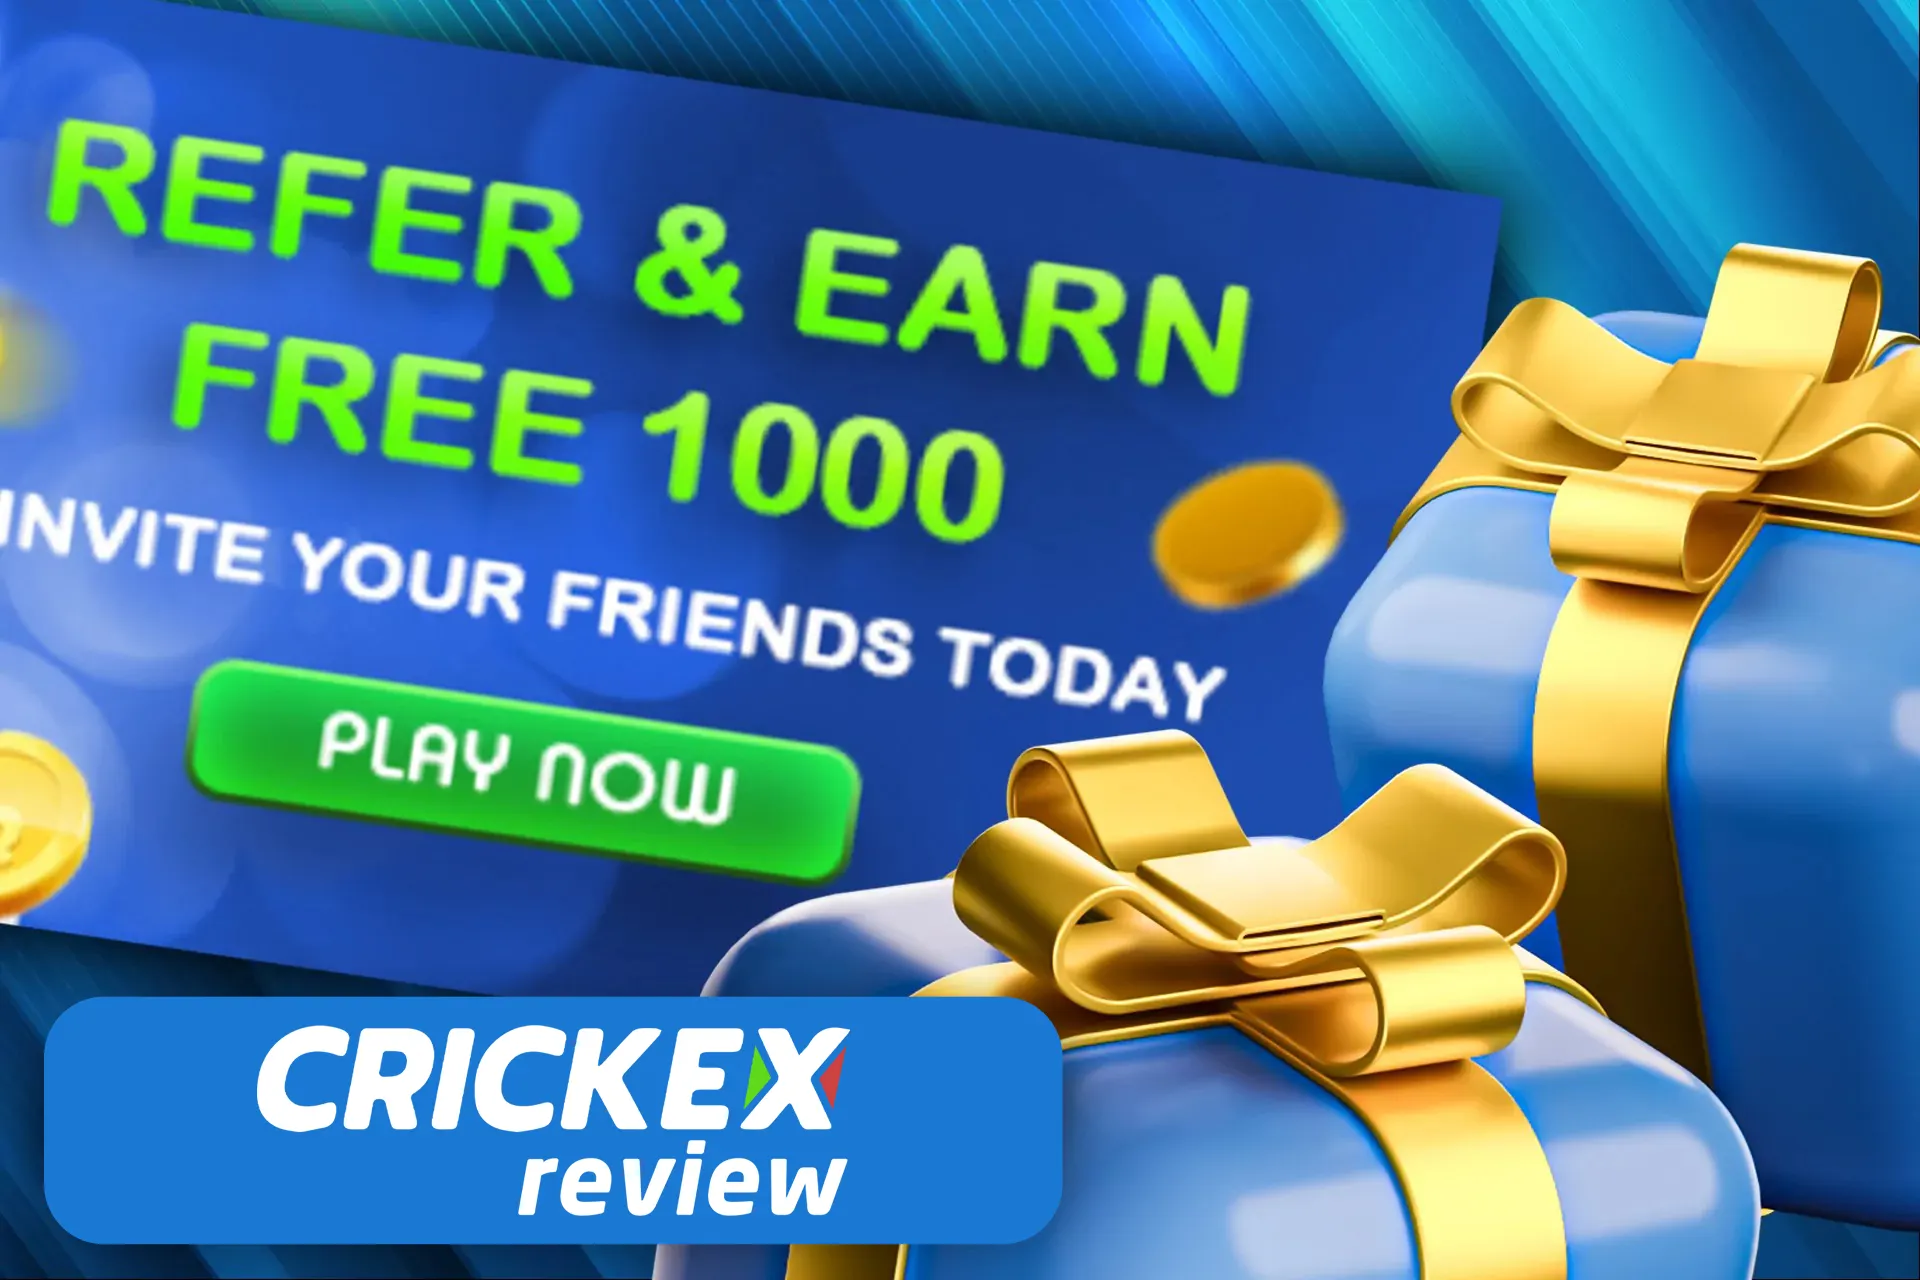 When your friend joins the Crickex community you both get 1000 BDT from Crickex.